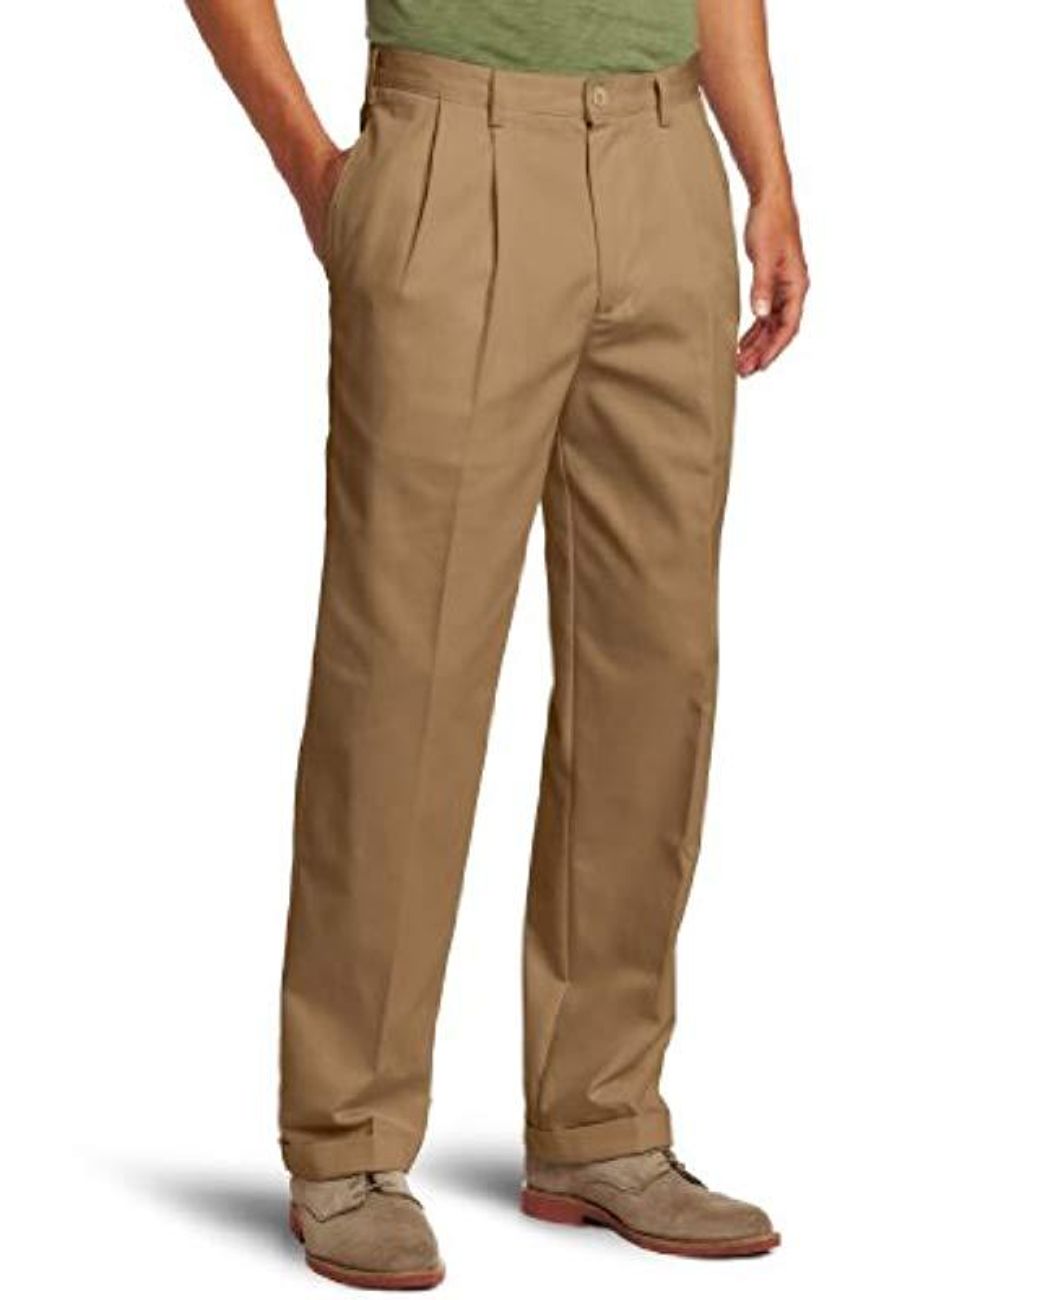 Izod American Chino Double Pleated Pant in Natural for Men - Save 17% ...